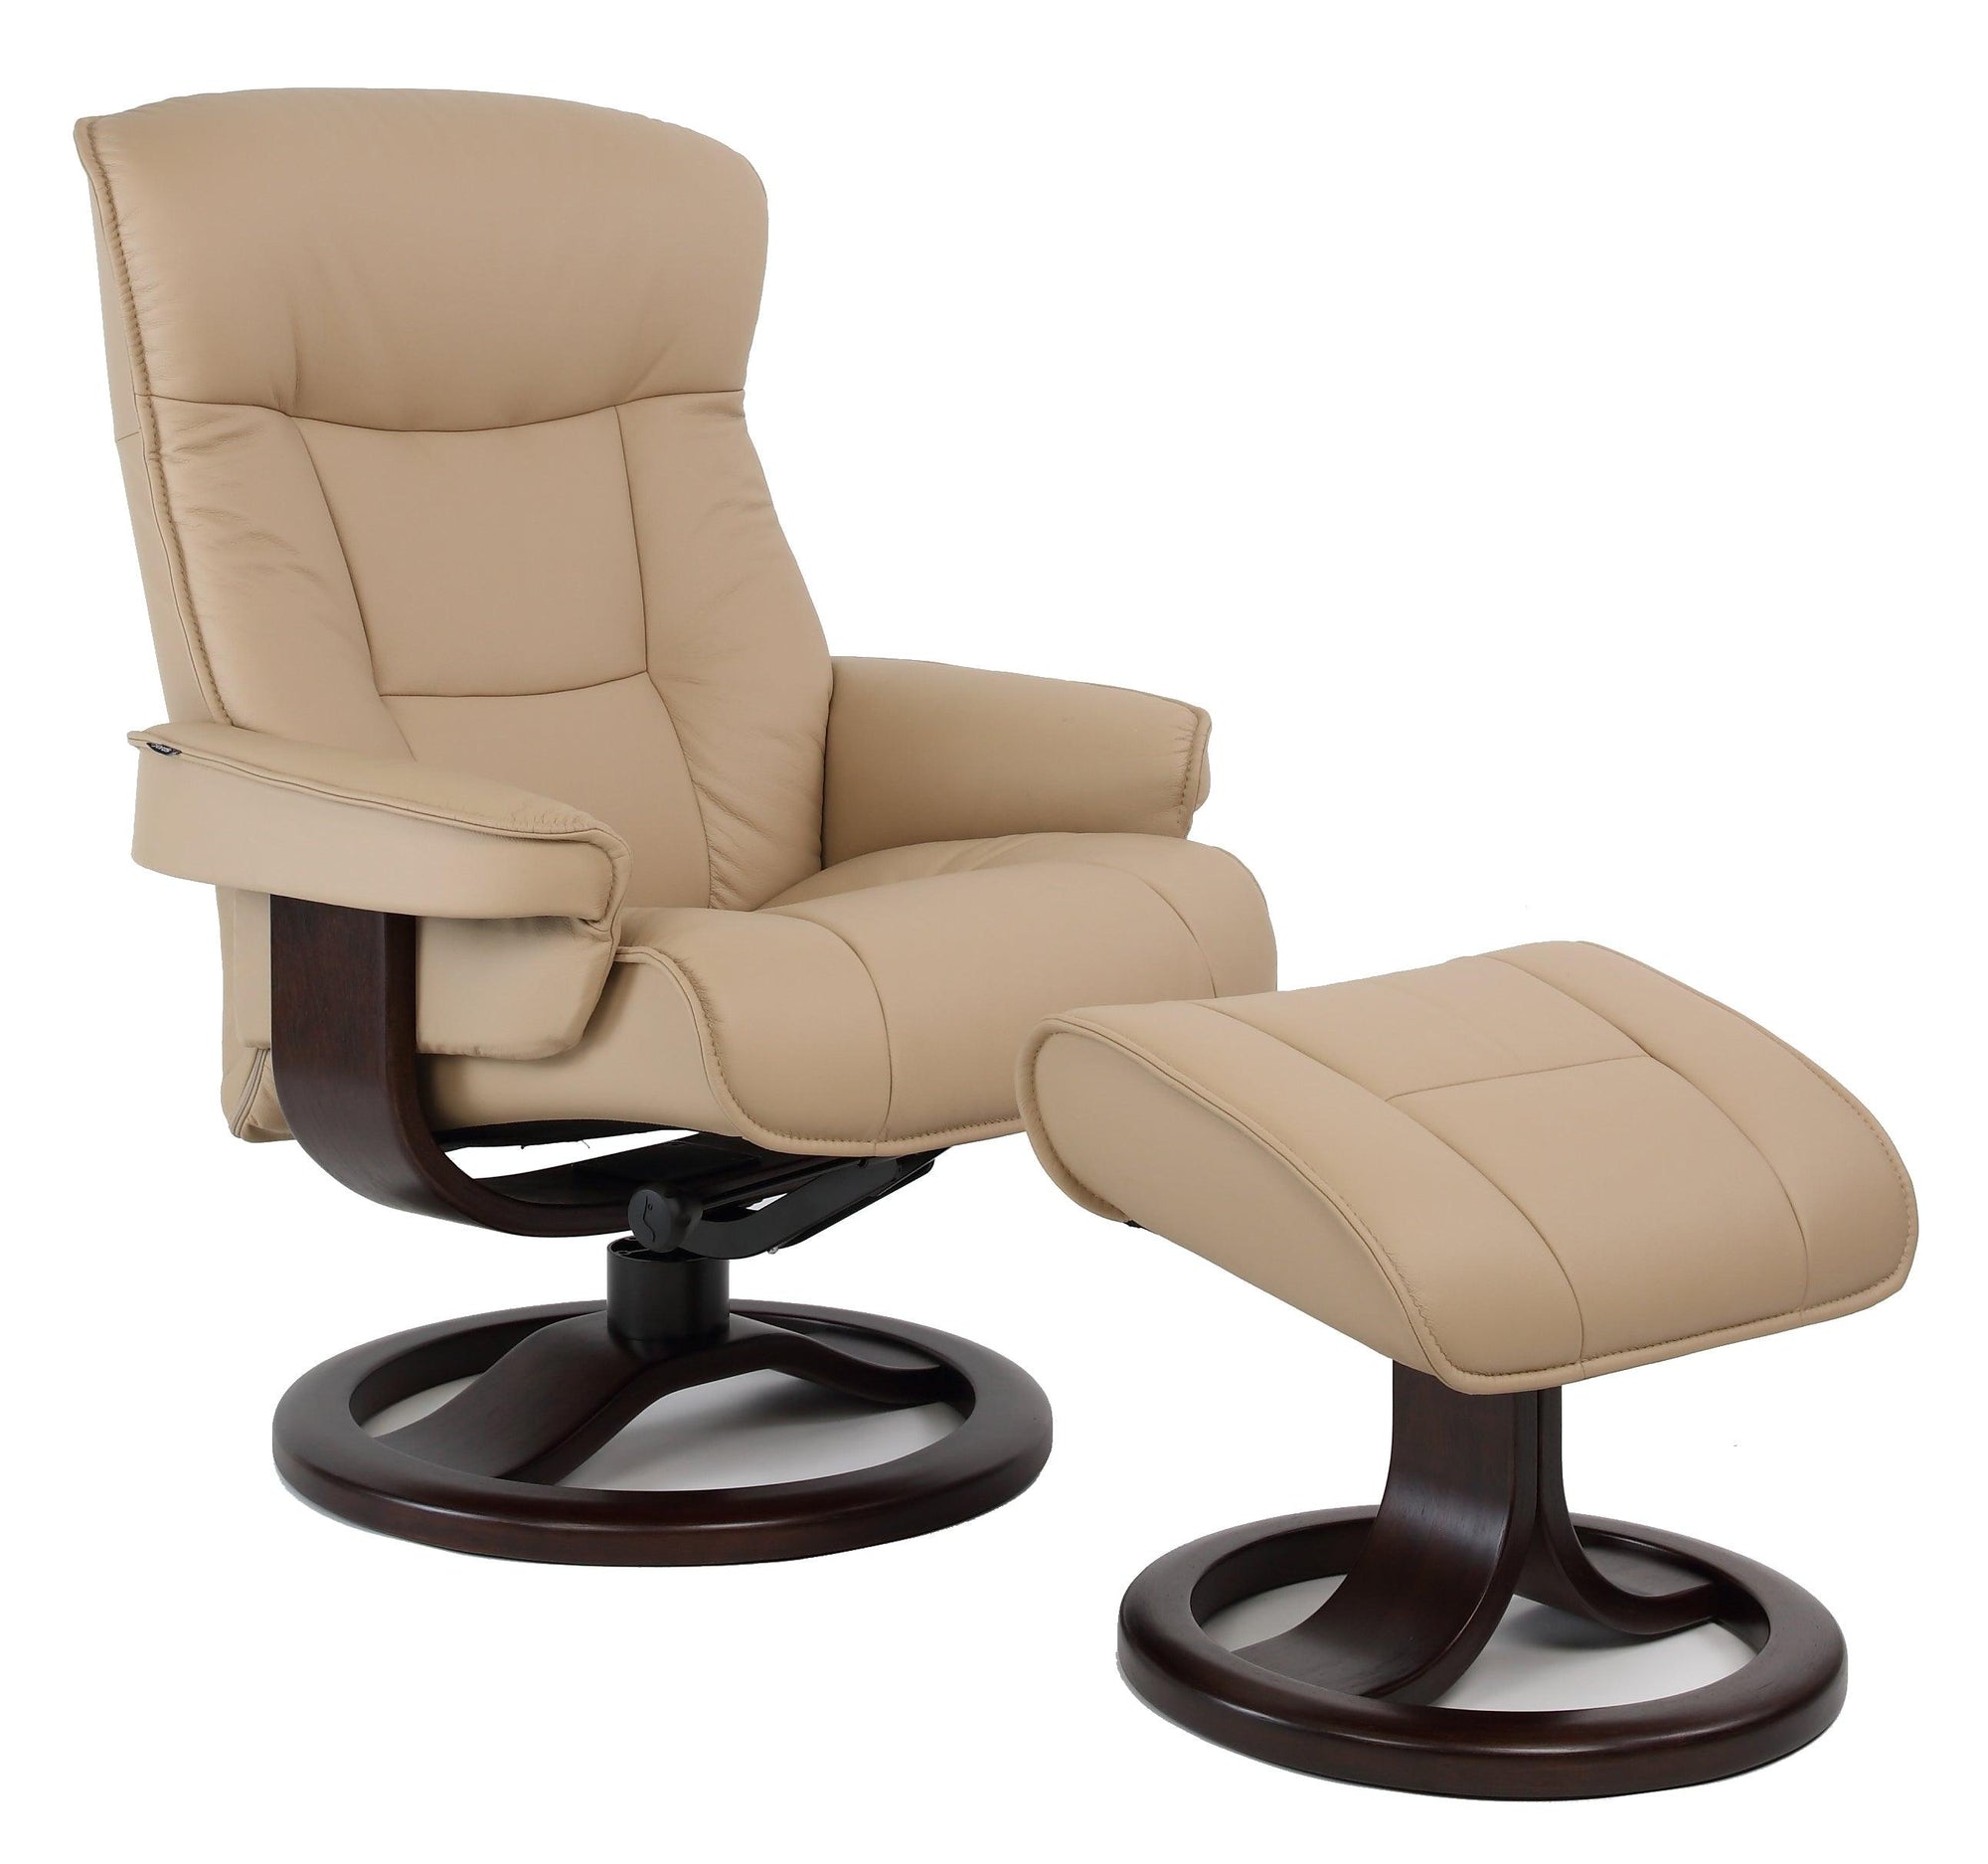 Bergen R Leather Reclining Chair in Sandel - Euro Living Furniture